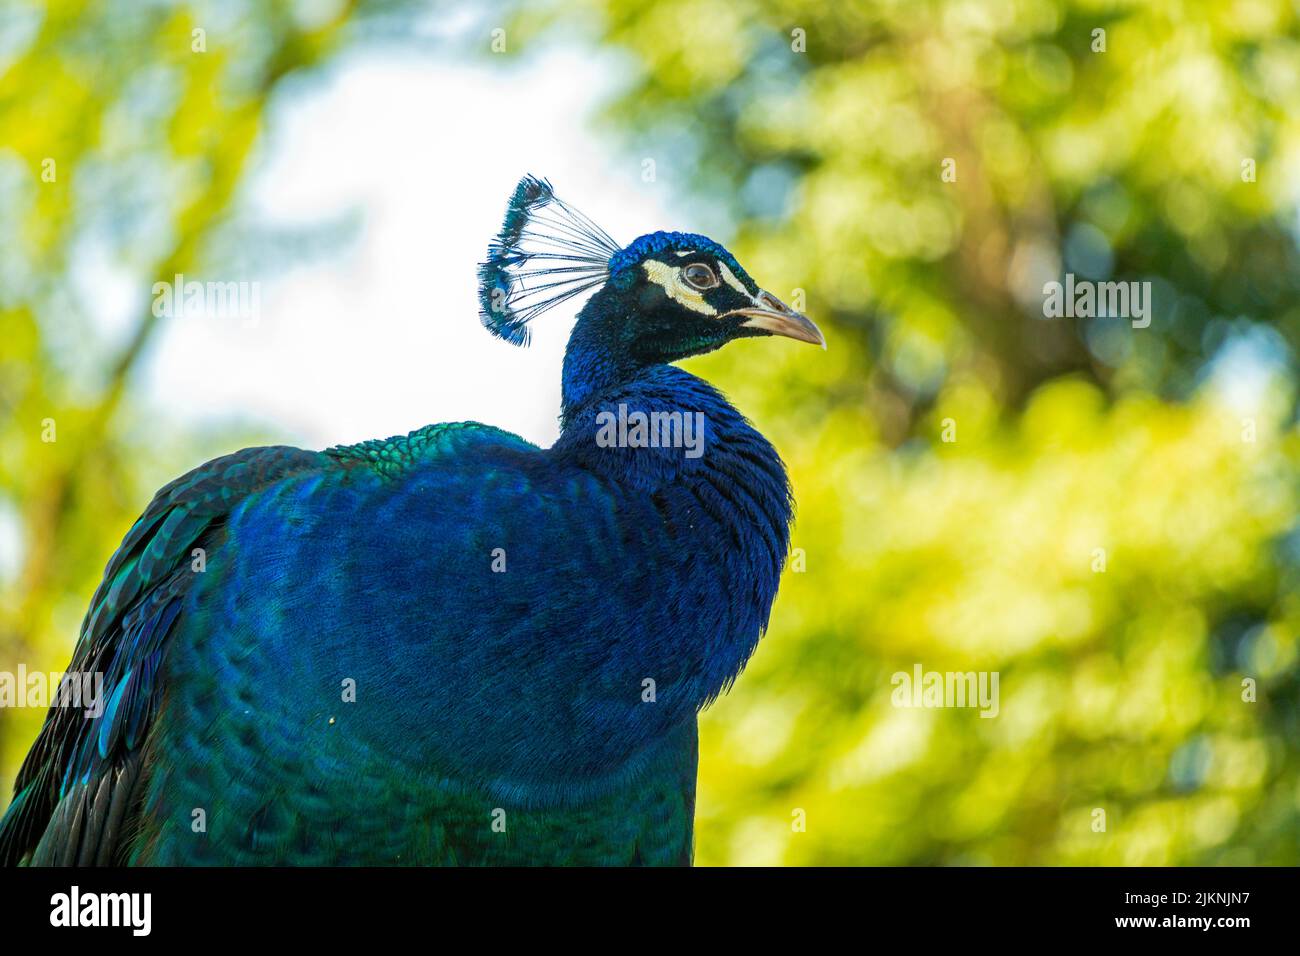 A closeup of an Indian peafowl (Pavo cristatus) standing proudly on the blurred background of trees Stock Photo